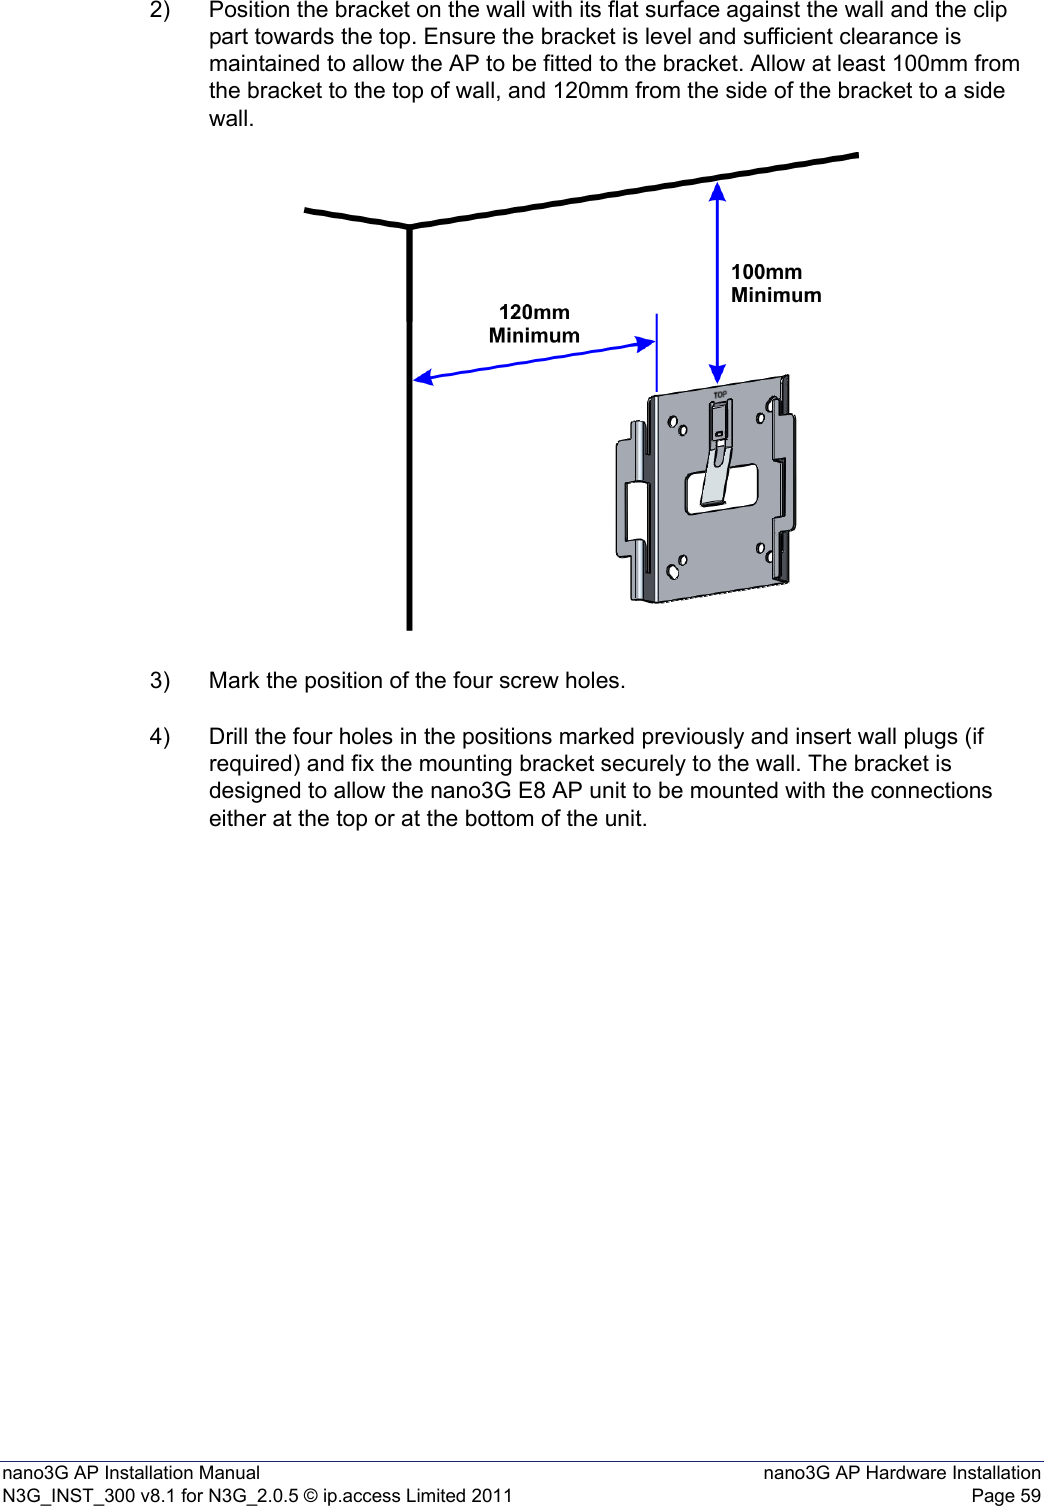 nano3G AP Installation Manual nano3G AP Hardware InstallationN3G_INST_300 v8.1 for N3G_2.0.5 © ip.access Limited 2011 Page 592) Position the bracket on the wall with its flat surface against the wall and the clip part towards the top. Ensure the bracket is level and sufficient clearance is maintained to allow the AP to be fitted to the bracket. Allow at least 100mm from the bracket to the top of wall, and 120mm from the side of the bracket to a side wall.3) Mark the position of the four screw holes.4) Drill the four holes in the positions marked previously and insert wall plugs (if required) and fix the mounting bracket securely to the wall. The bracket is designed to allow the nano3G E8 AP unit to be mounted with the connections either at the top or at the bottom of the unit.